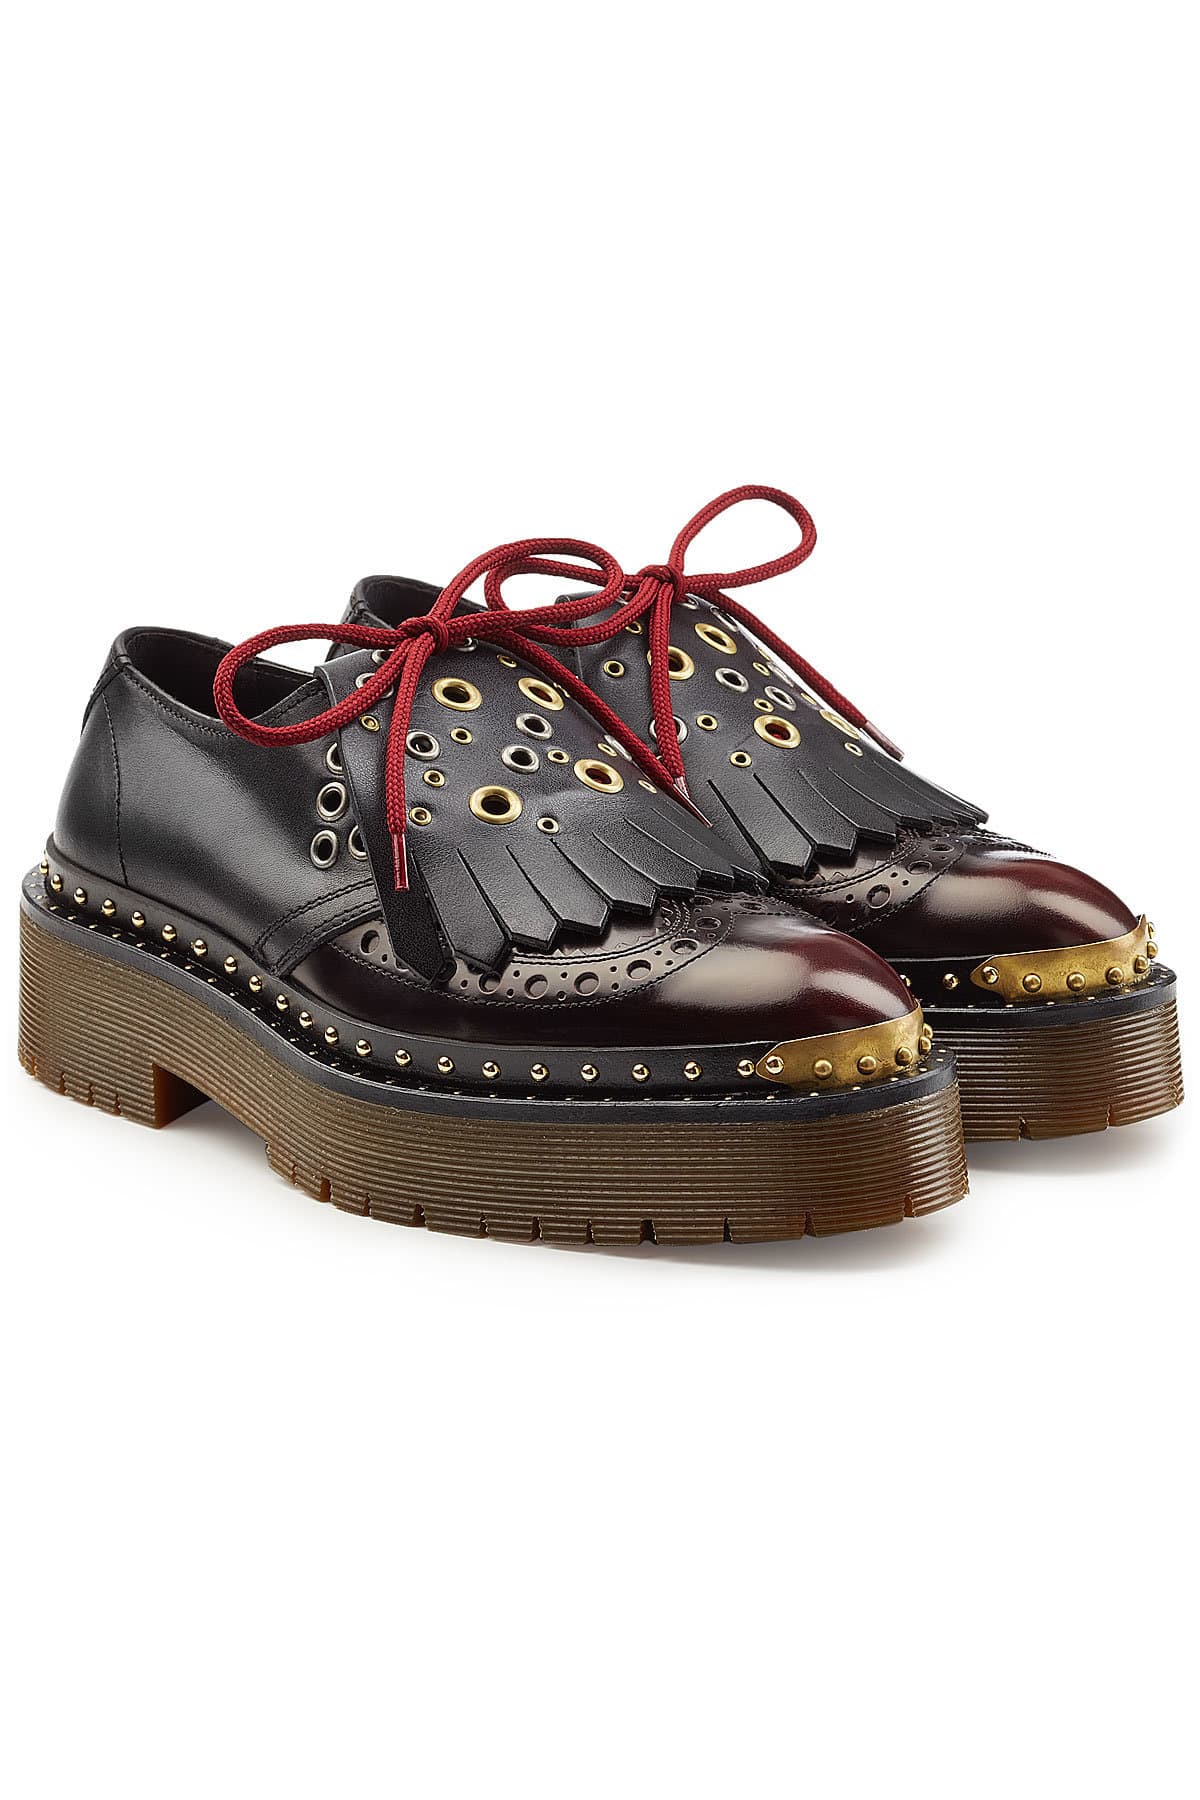 Burberry - Embellished Leather Brogues